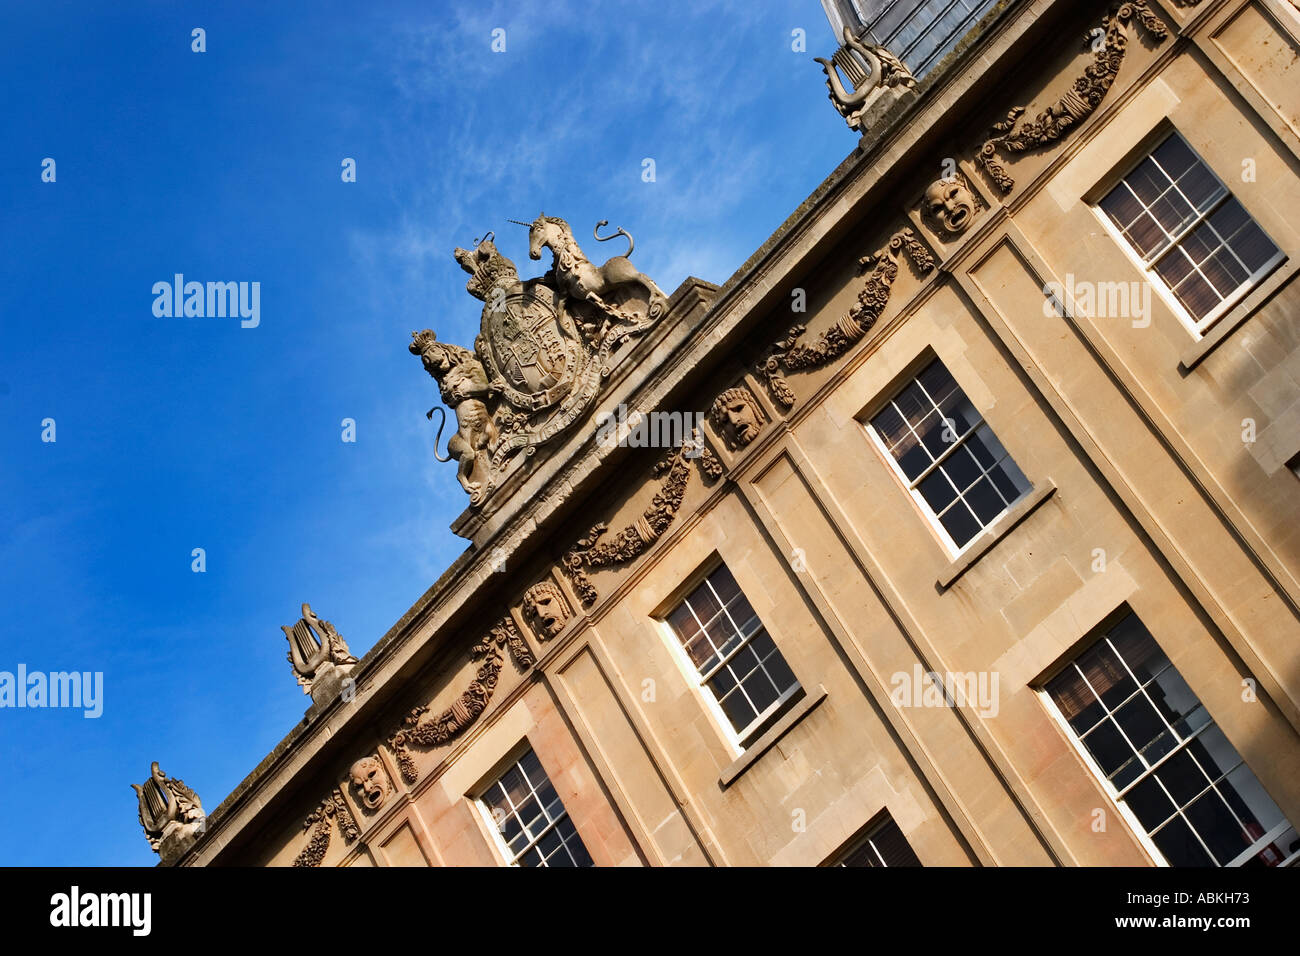 Coat of Arms above The Theatre Royal from Beauford Square in Bath Somerset England Stock Photo